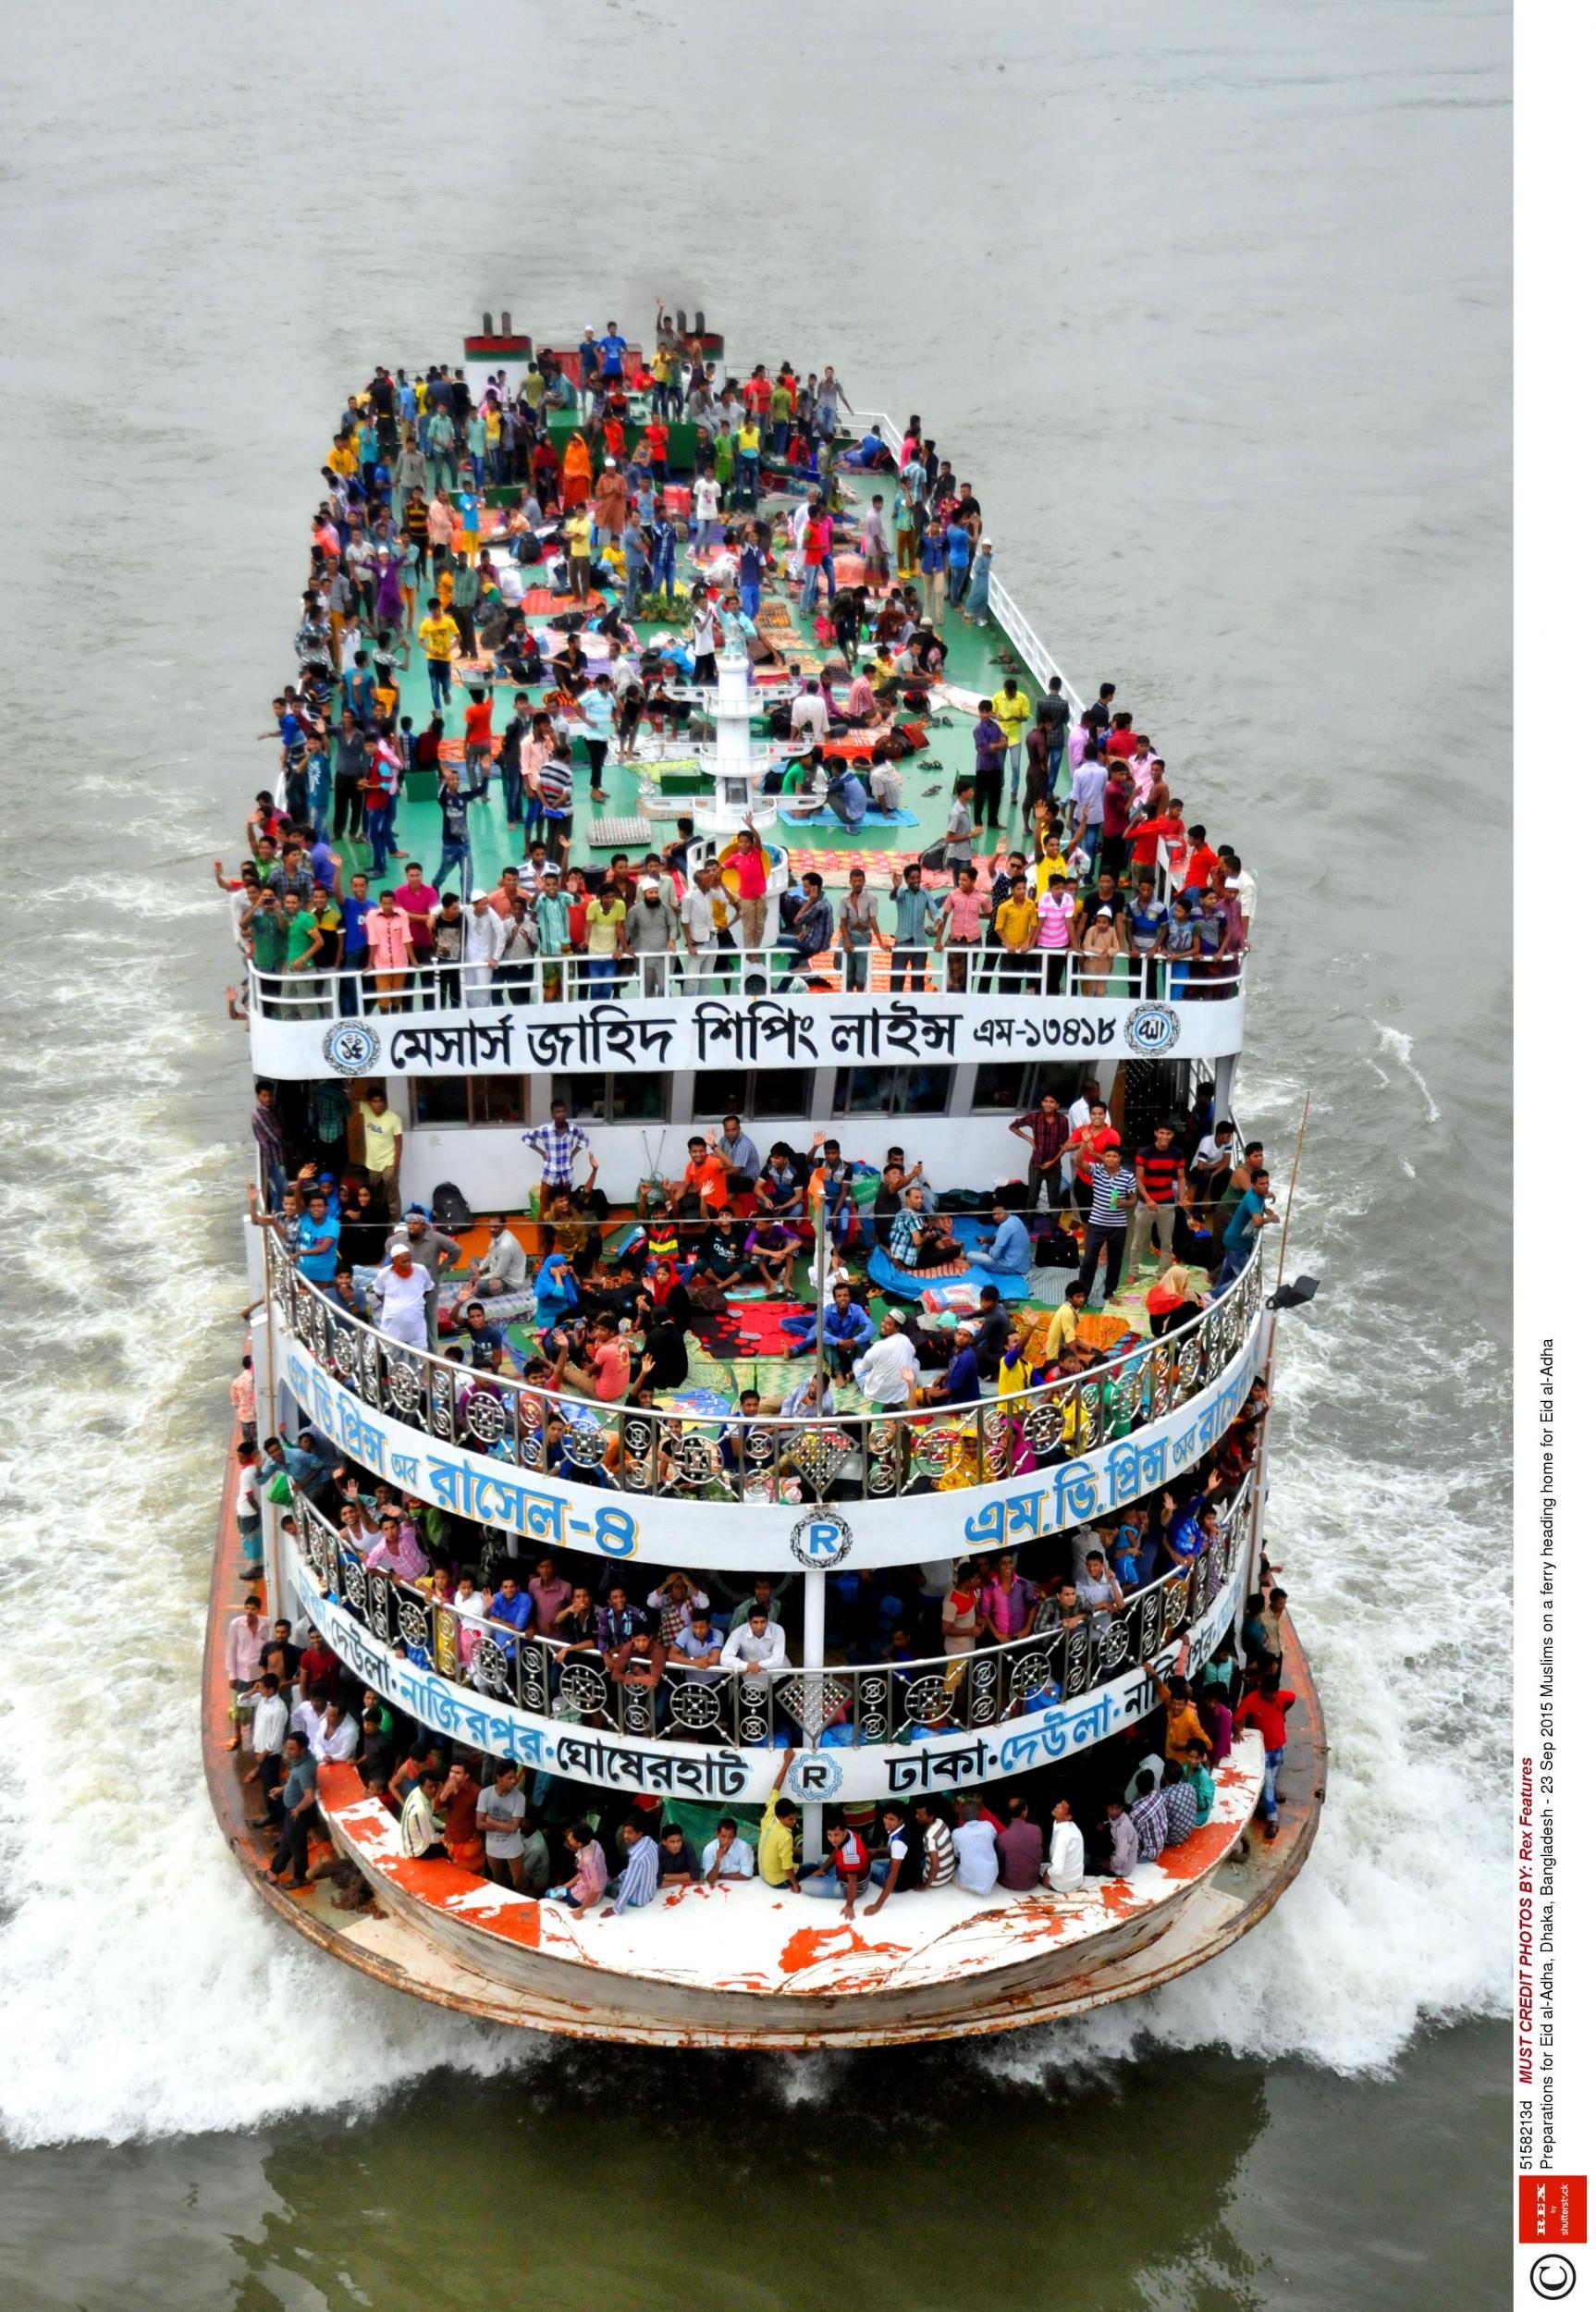 Bangladeshi Muslims travel home for celebrations on a crowded ferry in Dhaka